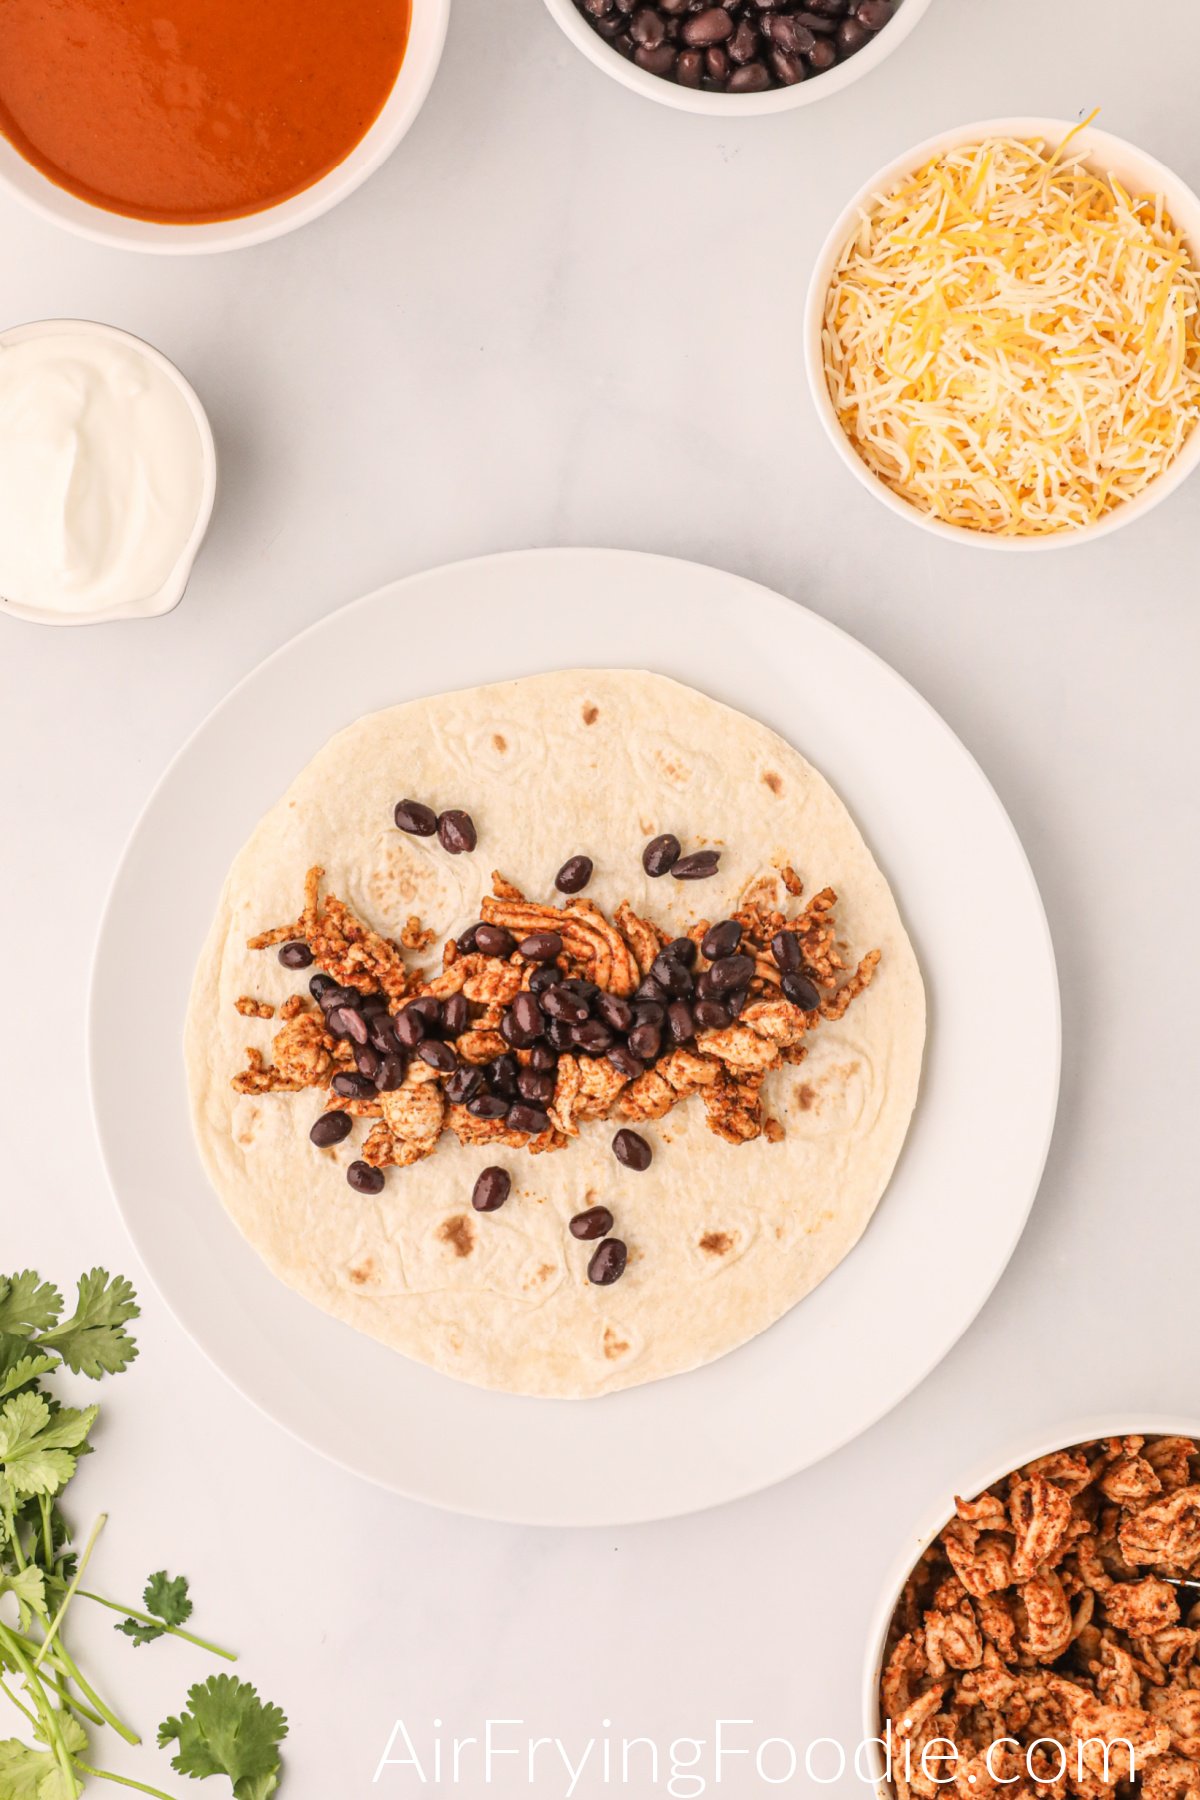 Tortilla topped with chicken and black beans.